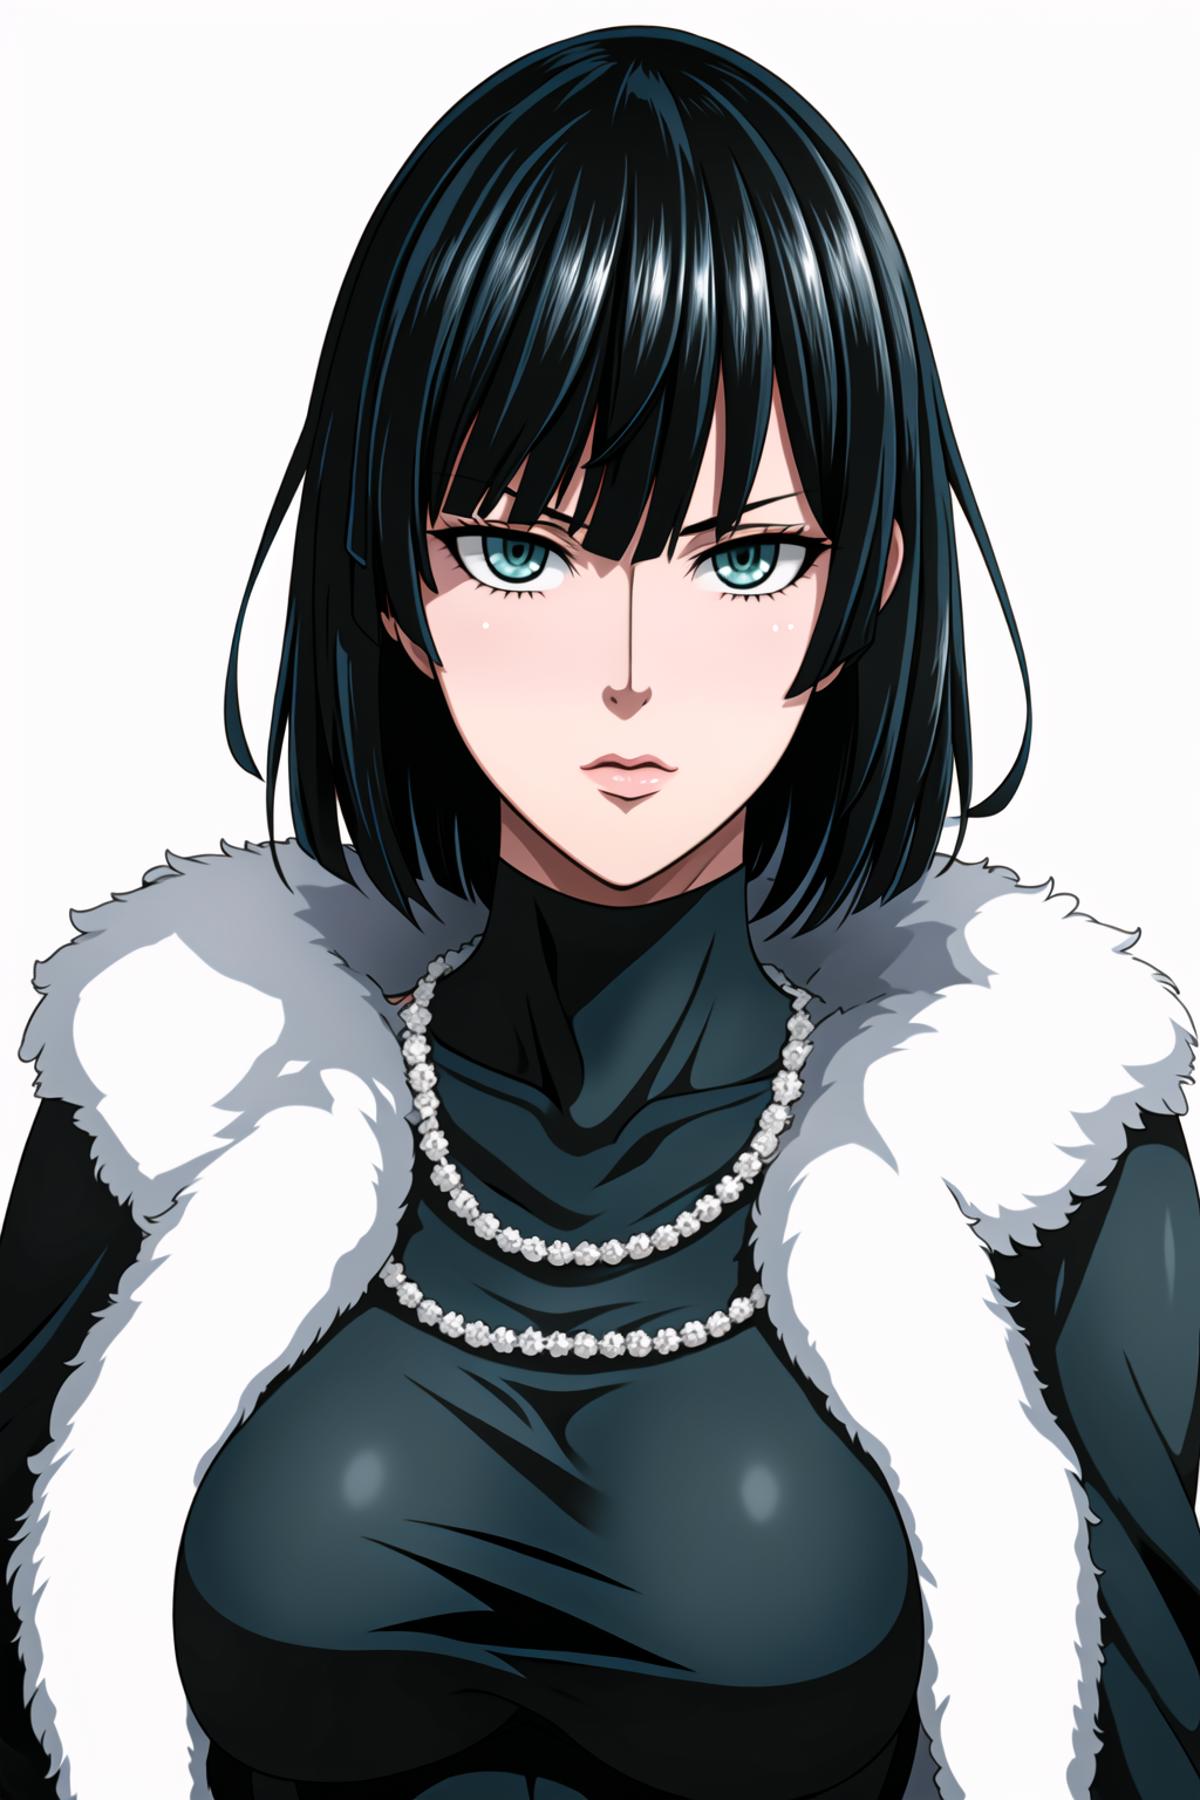 Anime girl wearing a black shirt and white fur.